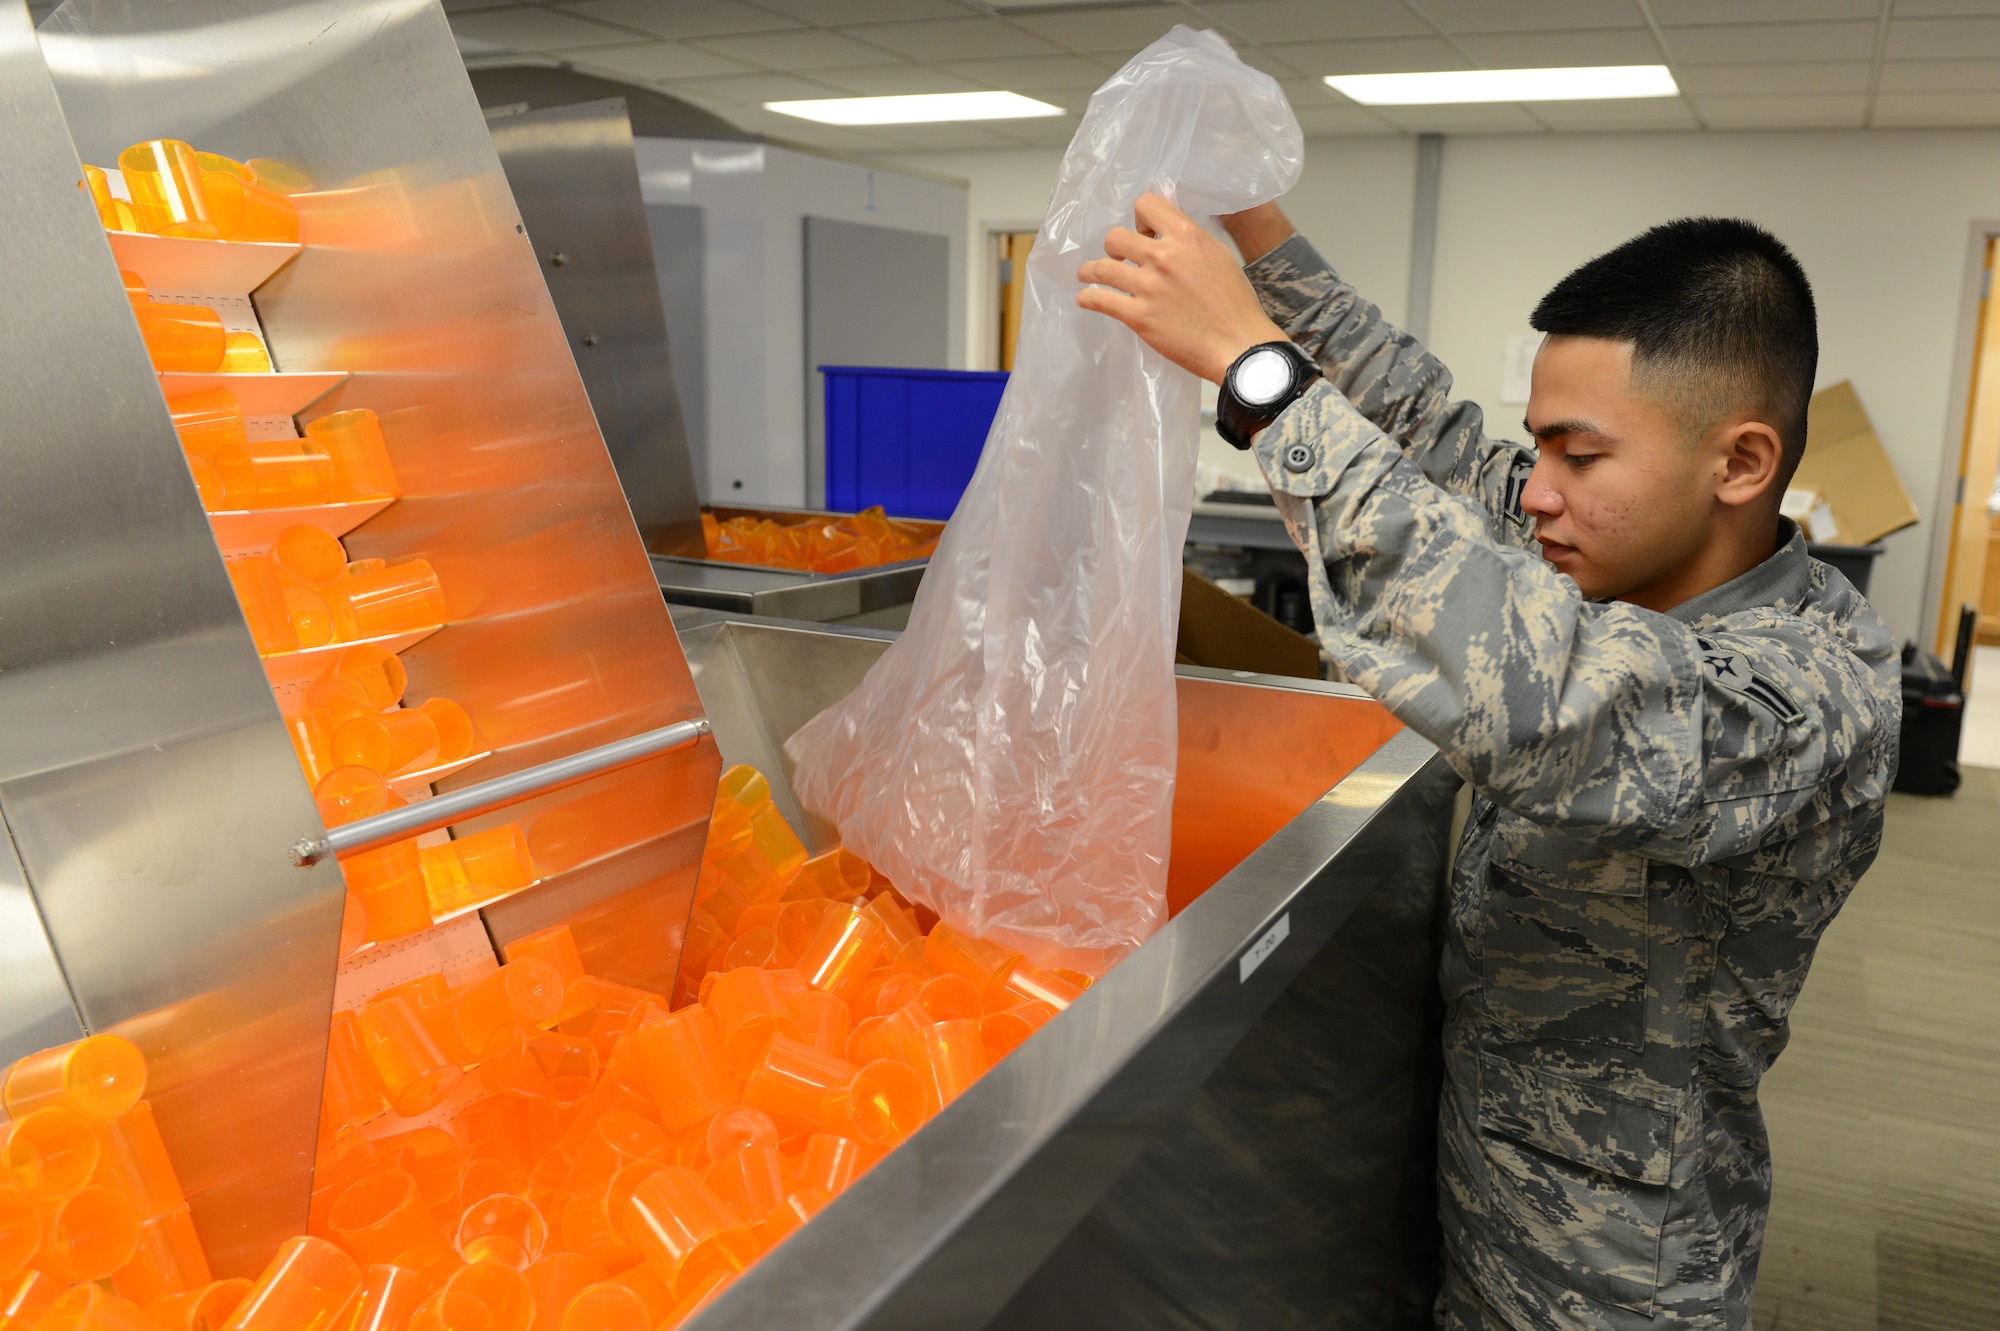 Airman 1st Class Michael Pacla, 56th Medical Support Squadron pharmacy technician, refills the prescription bottle dispenser at Luke Air Force Base, Arizona, Oct. 19, 2015. The bottles get loaded through the conveyor belt and get labelled at user request autonomously. (U.S. Air Force photo by Senior Airman James Hensley)